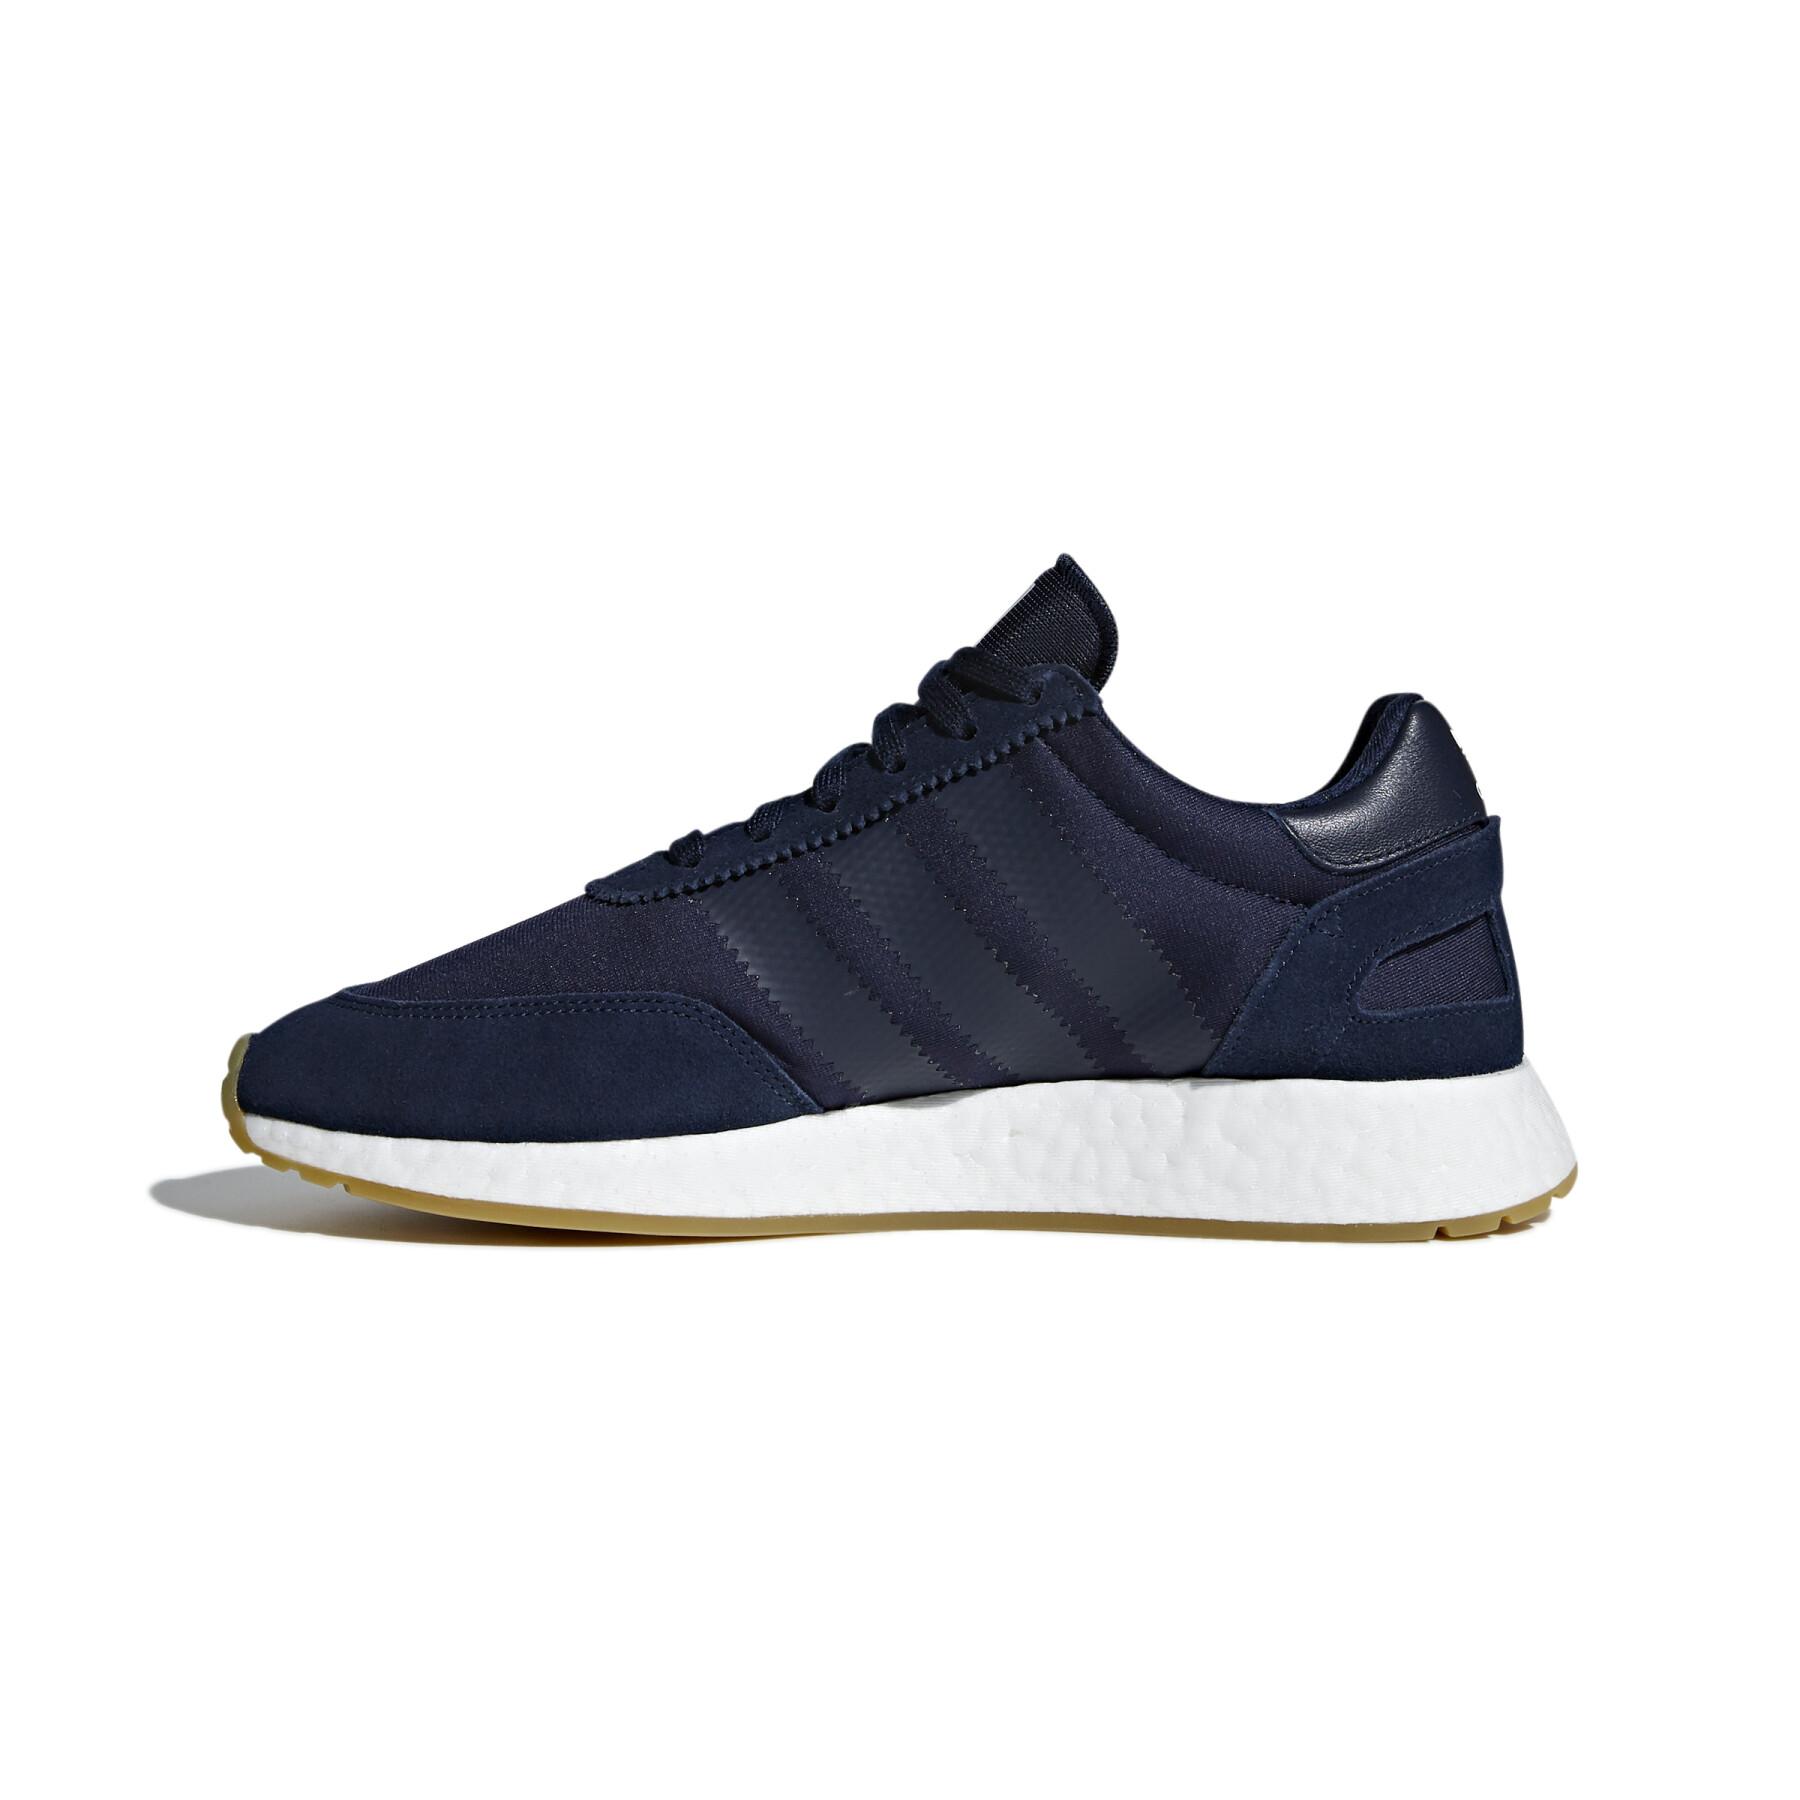 Sneakers adidas I-5923